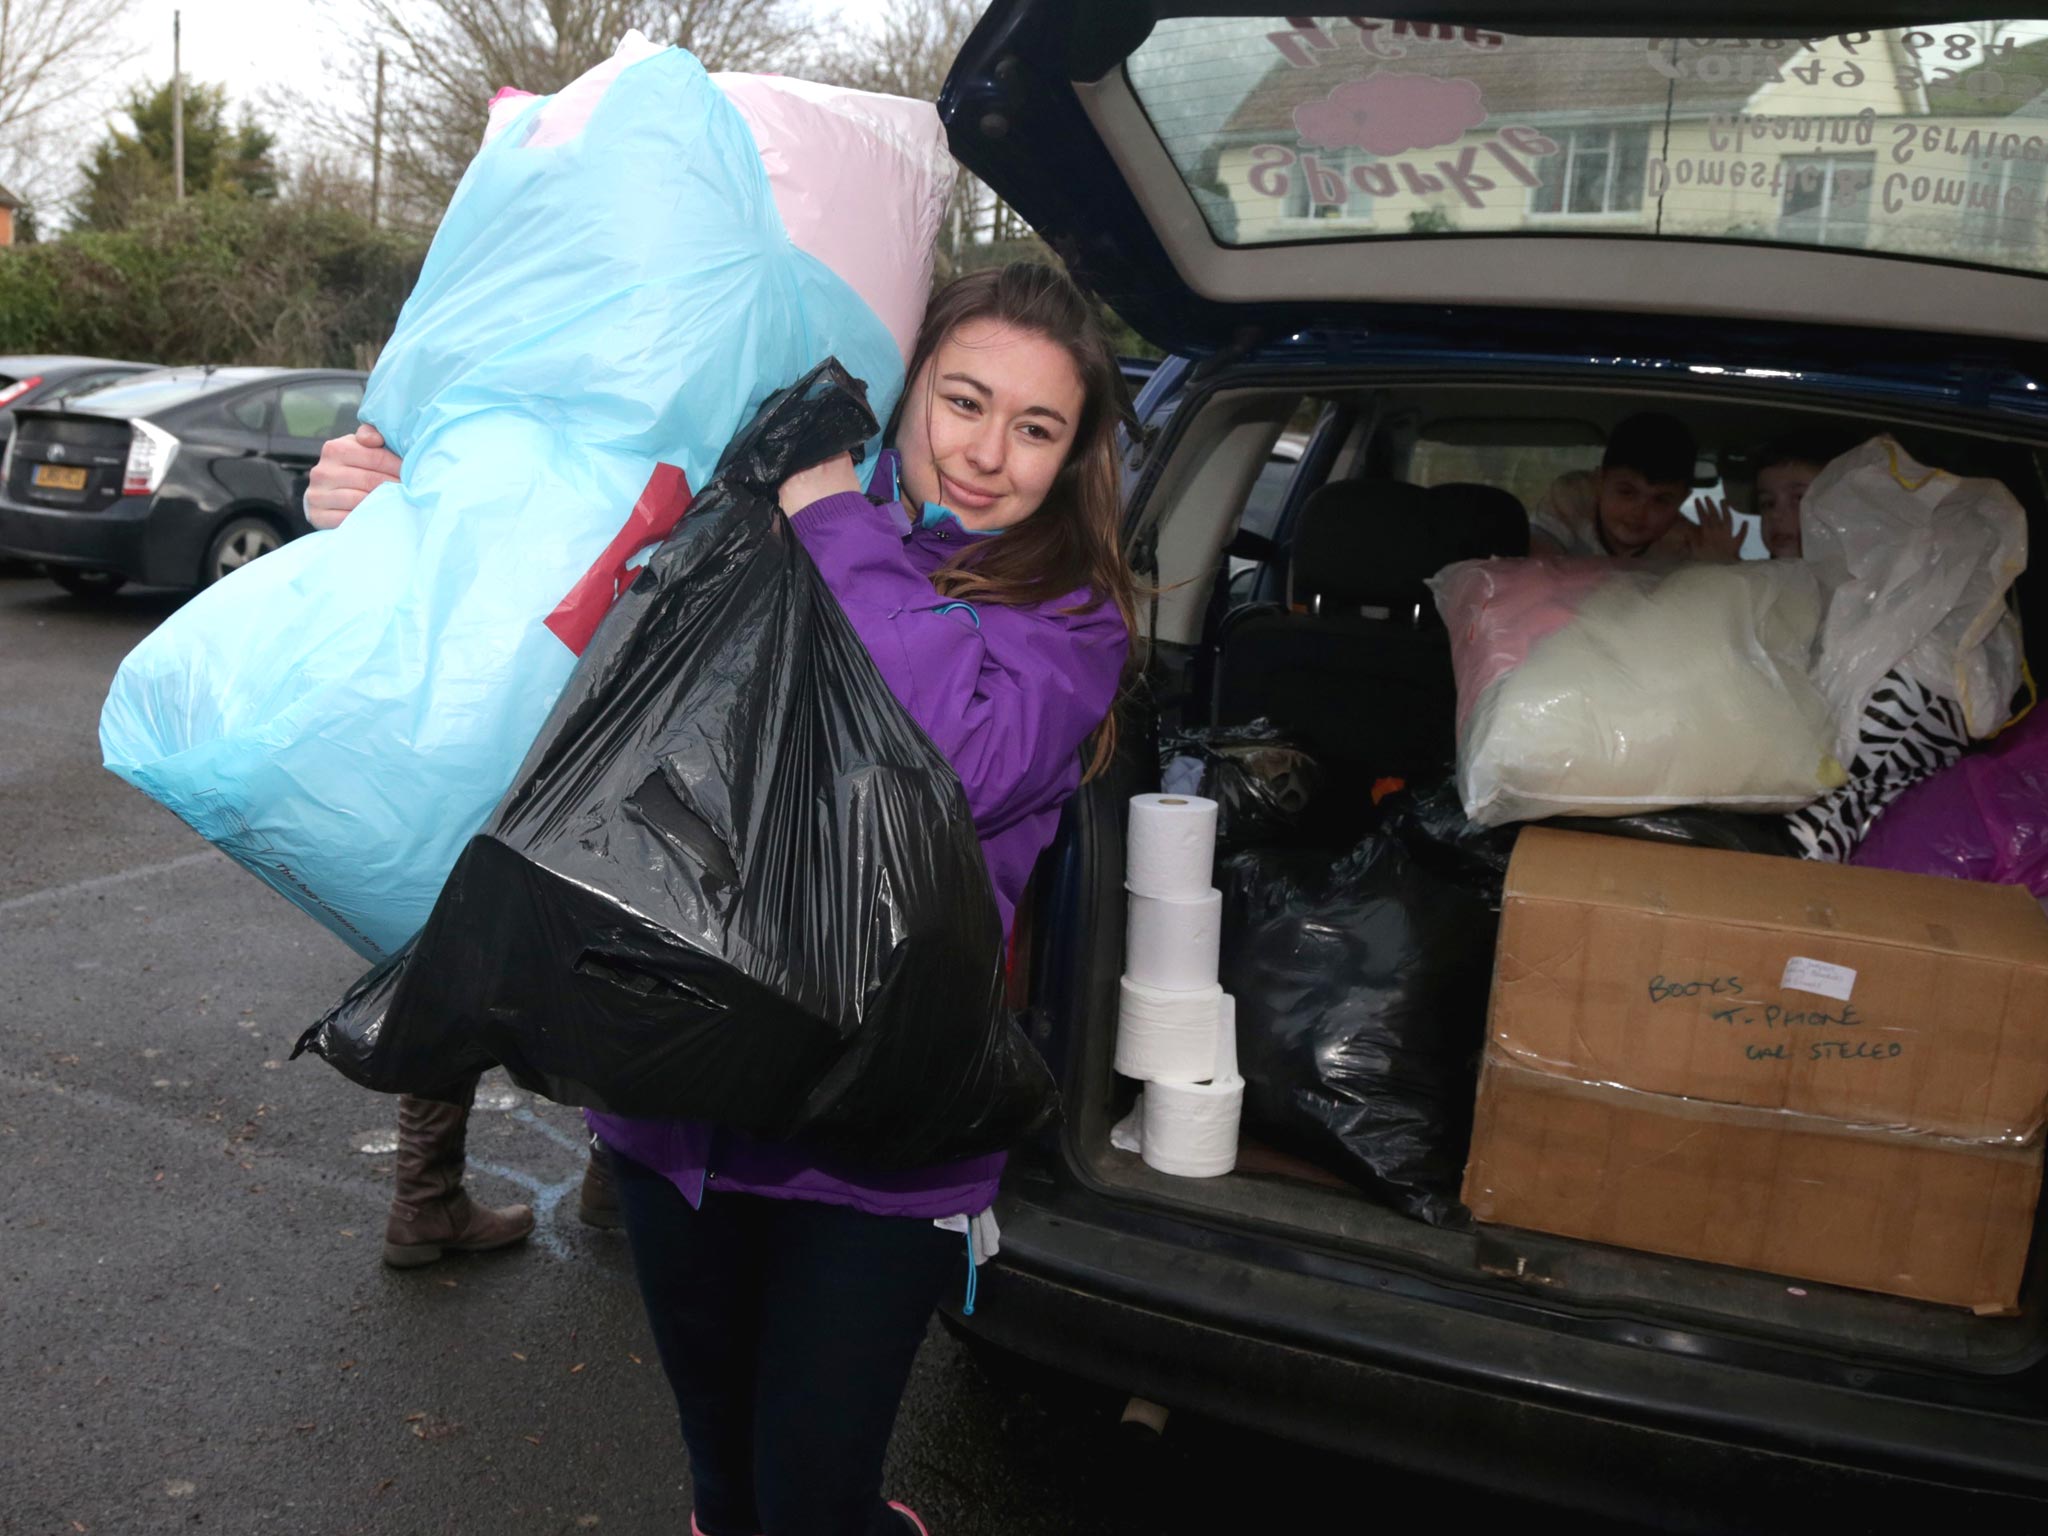 Volunteers sort out donations in the King Alfred Inn at Burrowbridge on the Somerset Levels